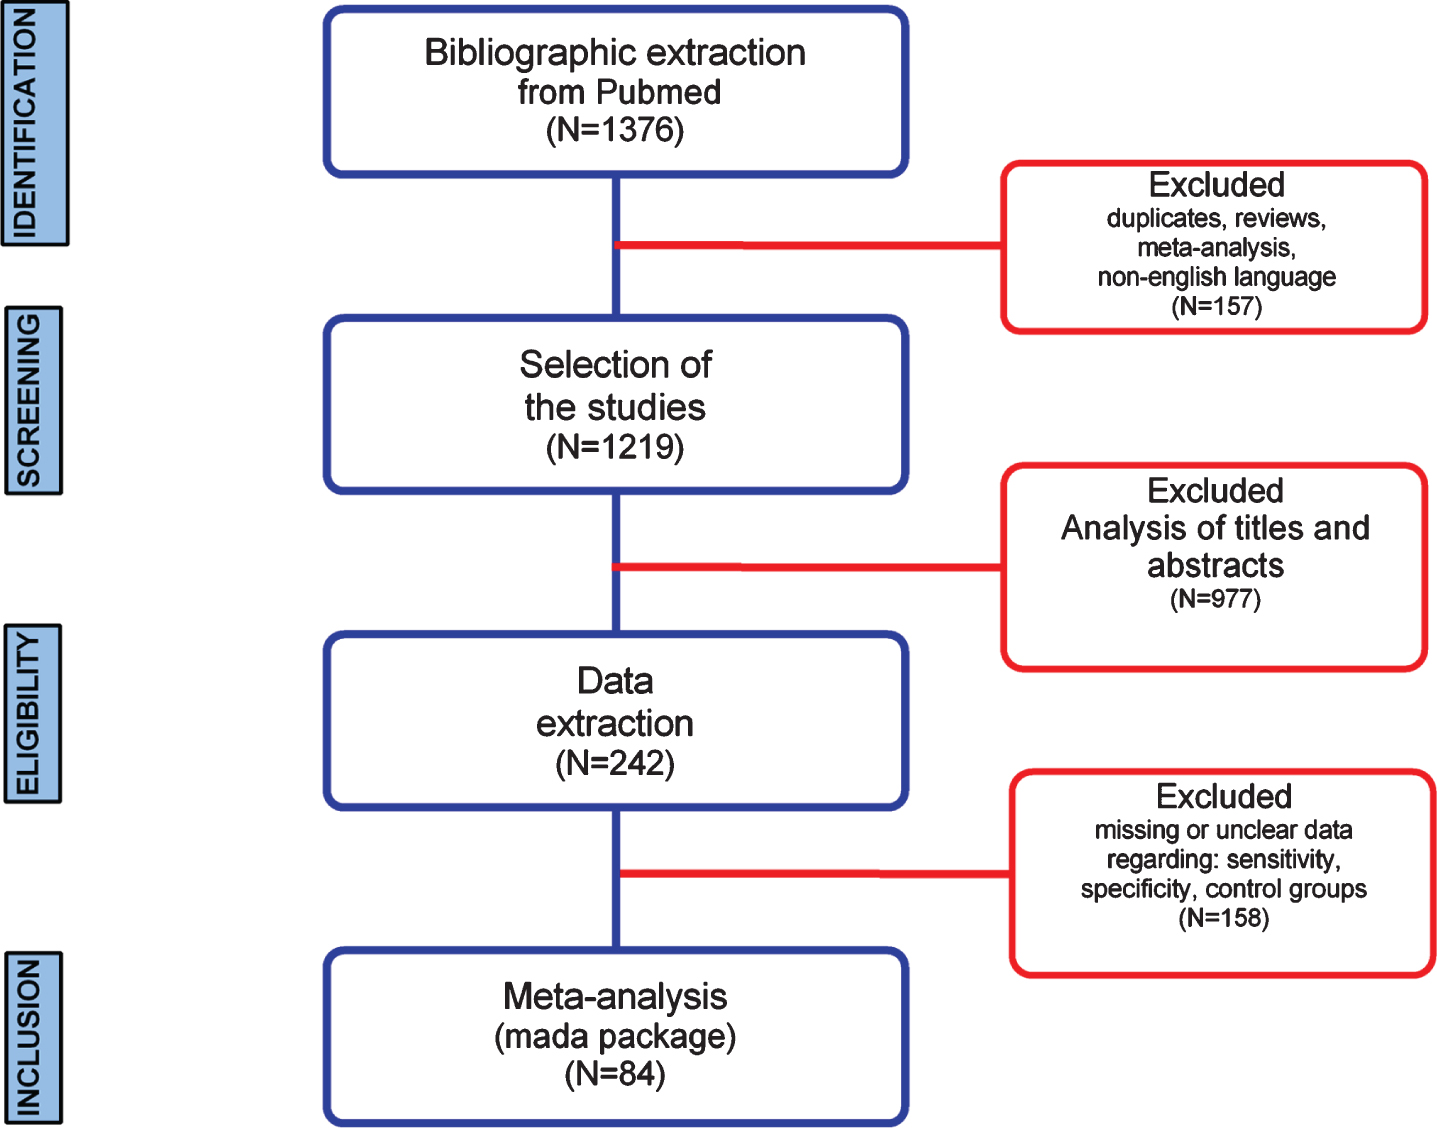 Systematic review and meta-analysis workflow diagram.